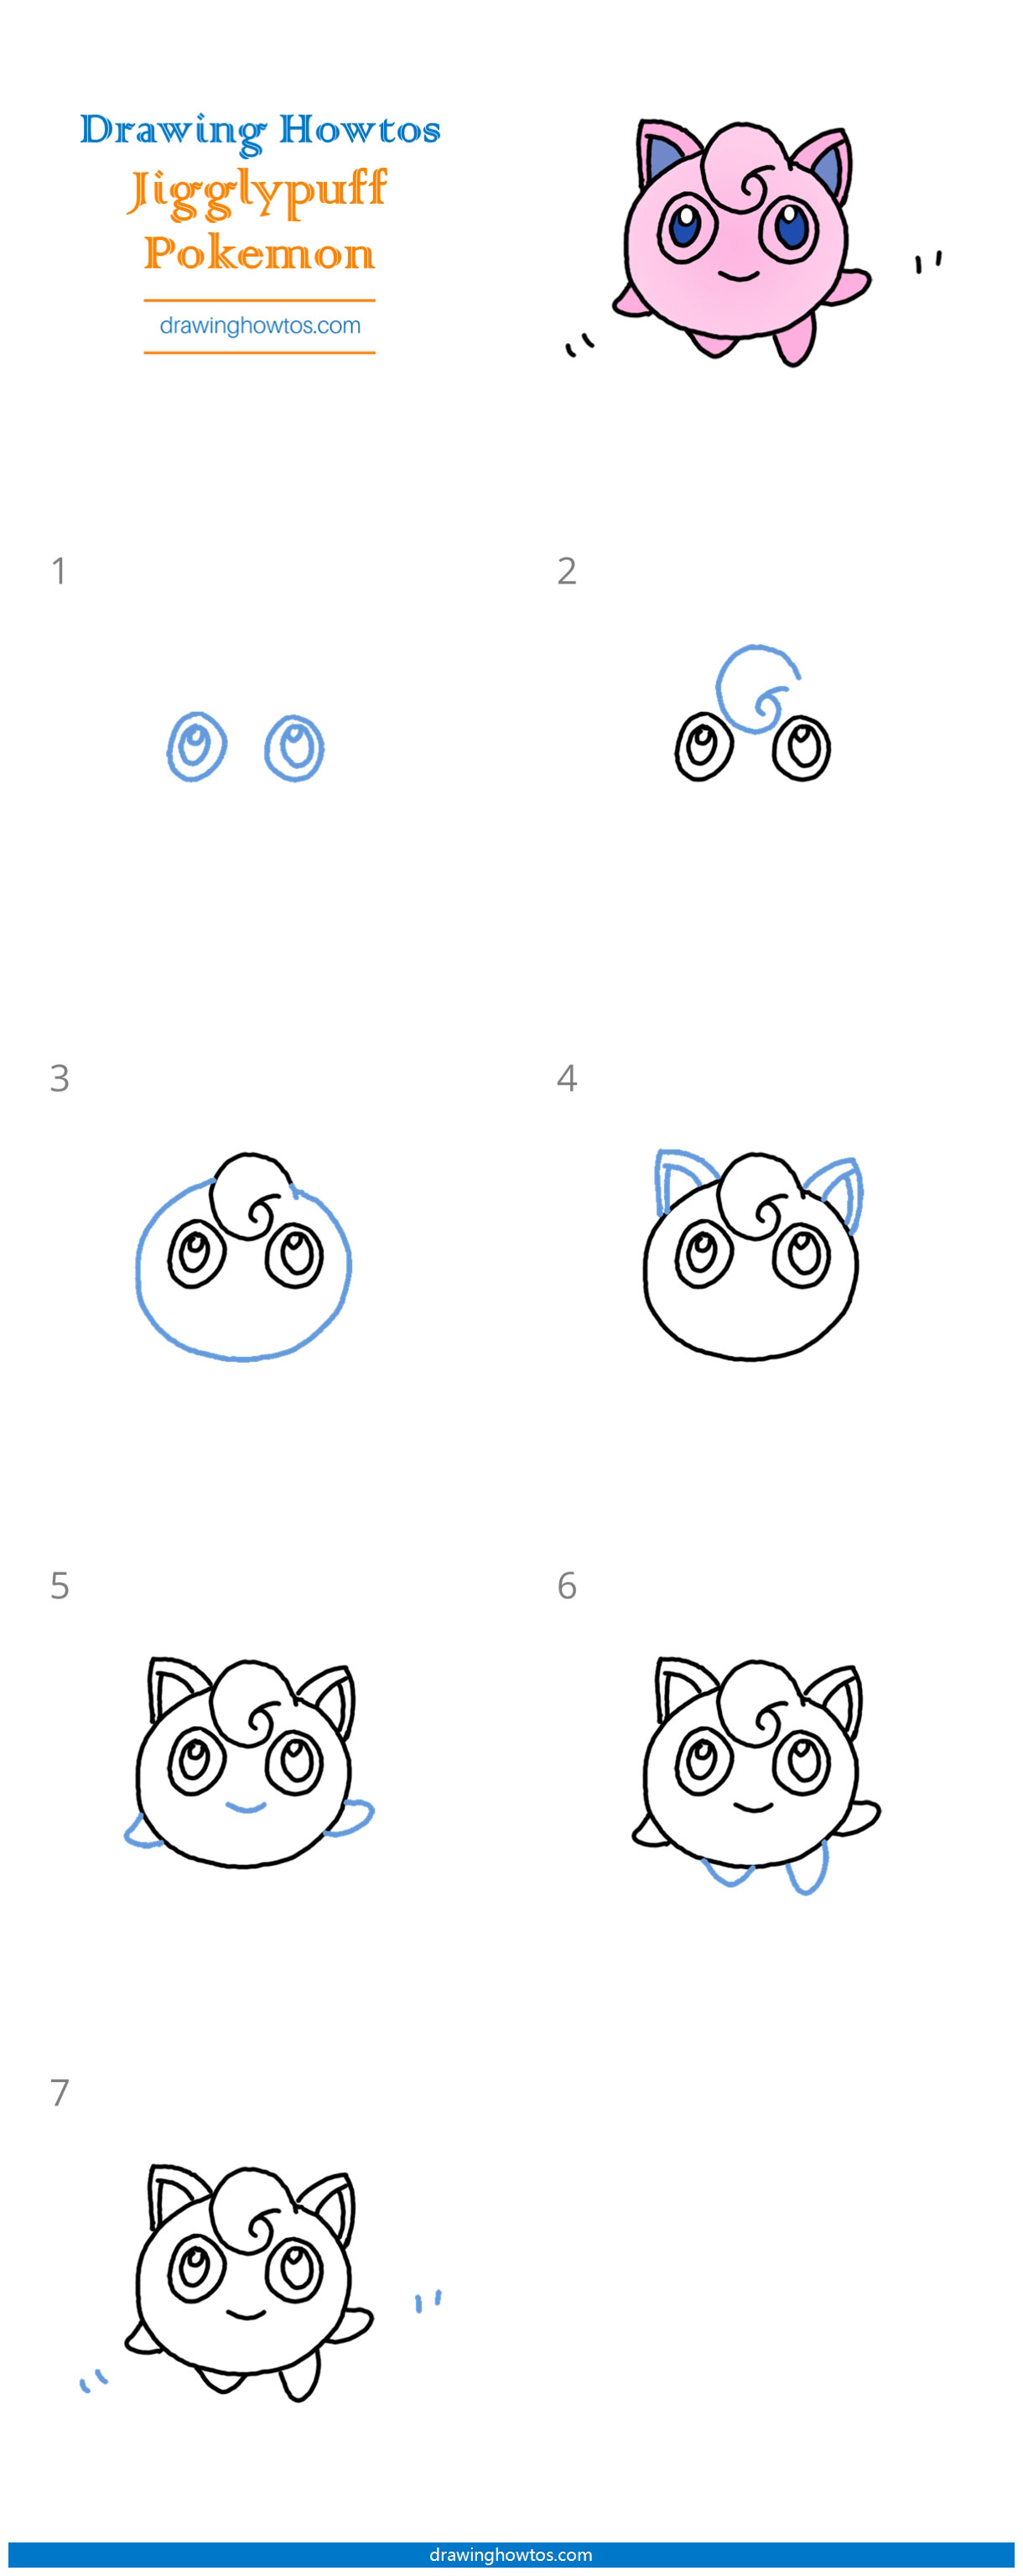 How to Draw Pokemon Jigglypuff Step by Step